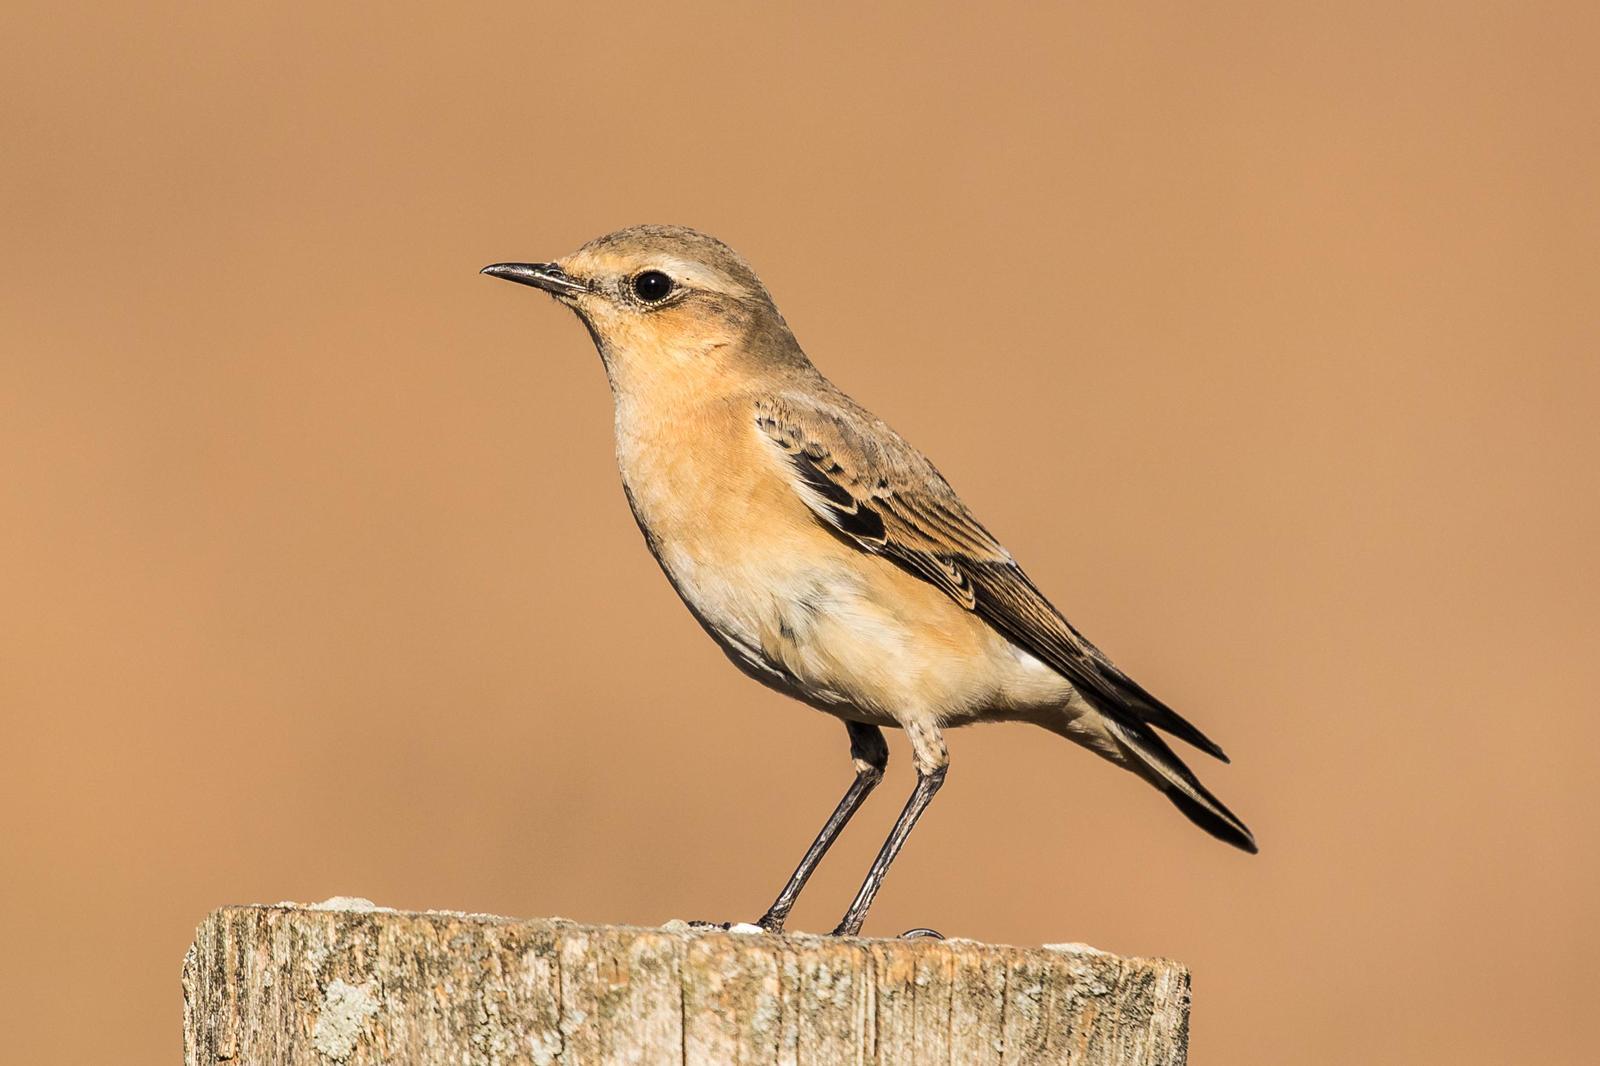 Northern Wheatear Photo by Terry Campbell